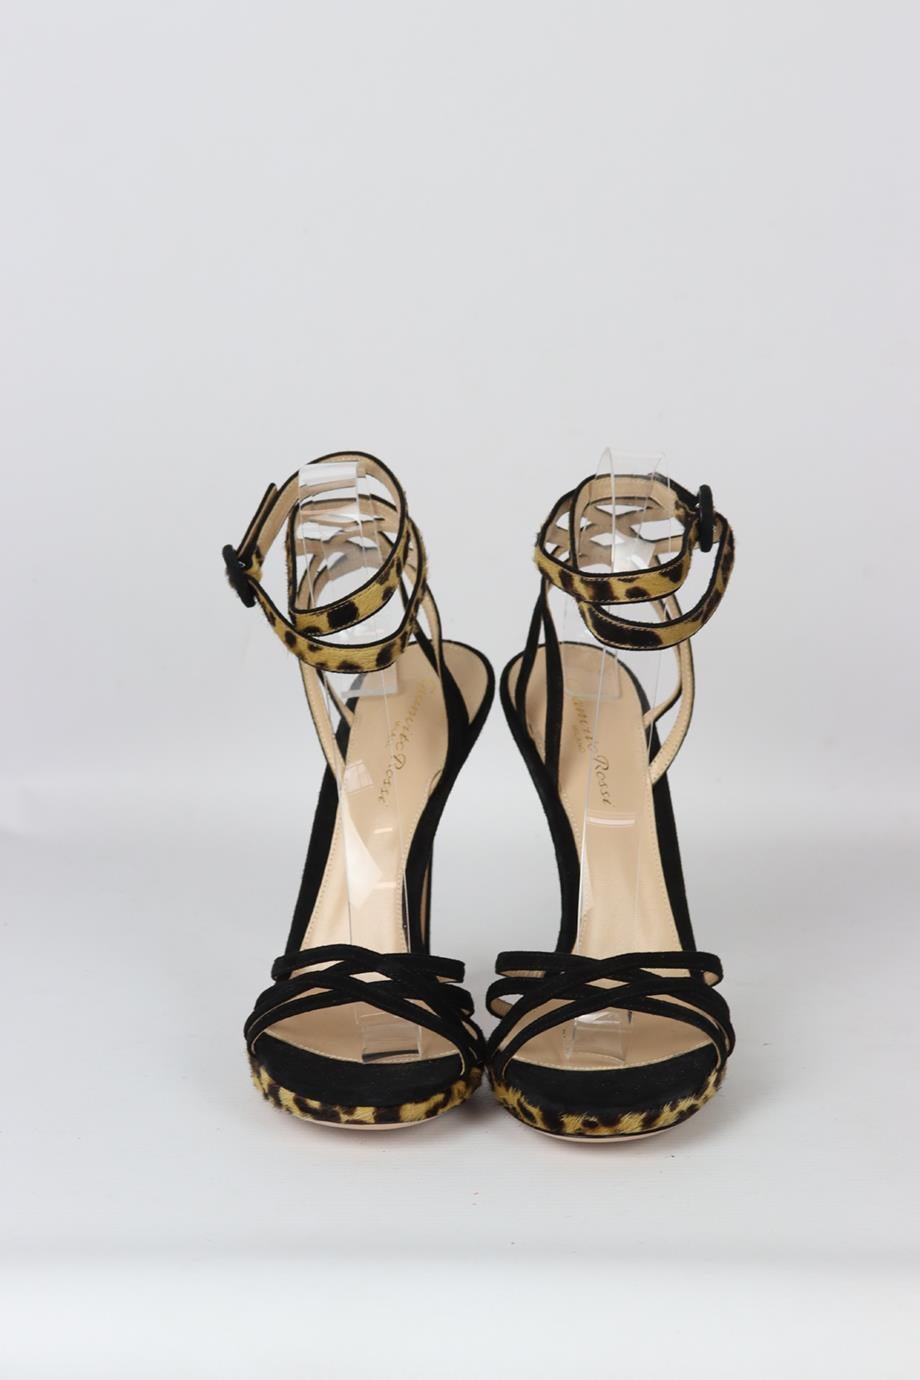 Gianvito Rossi leopard print calf hair and suede sandals. Black, beige and brown. Buckle fastening at side. Does not come with dustbag or box. Heel Height: 3.6 in. Platform: 0.7 in. Insole: 9.5 in. New without box